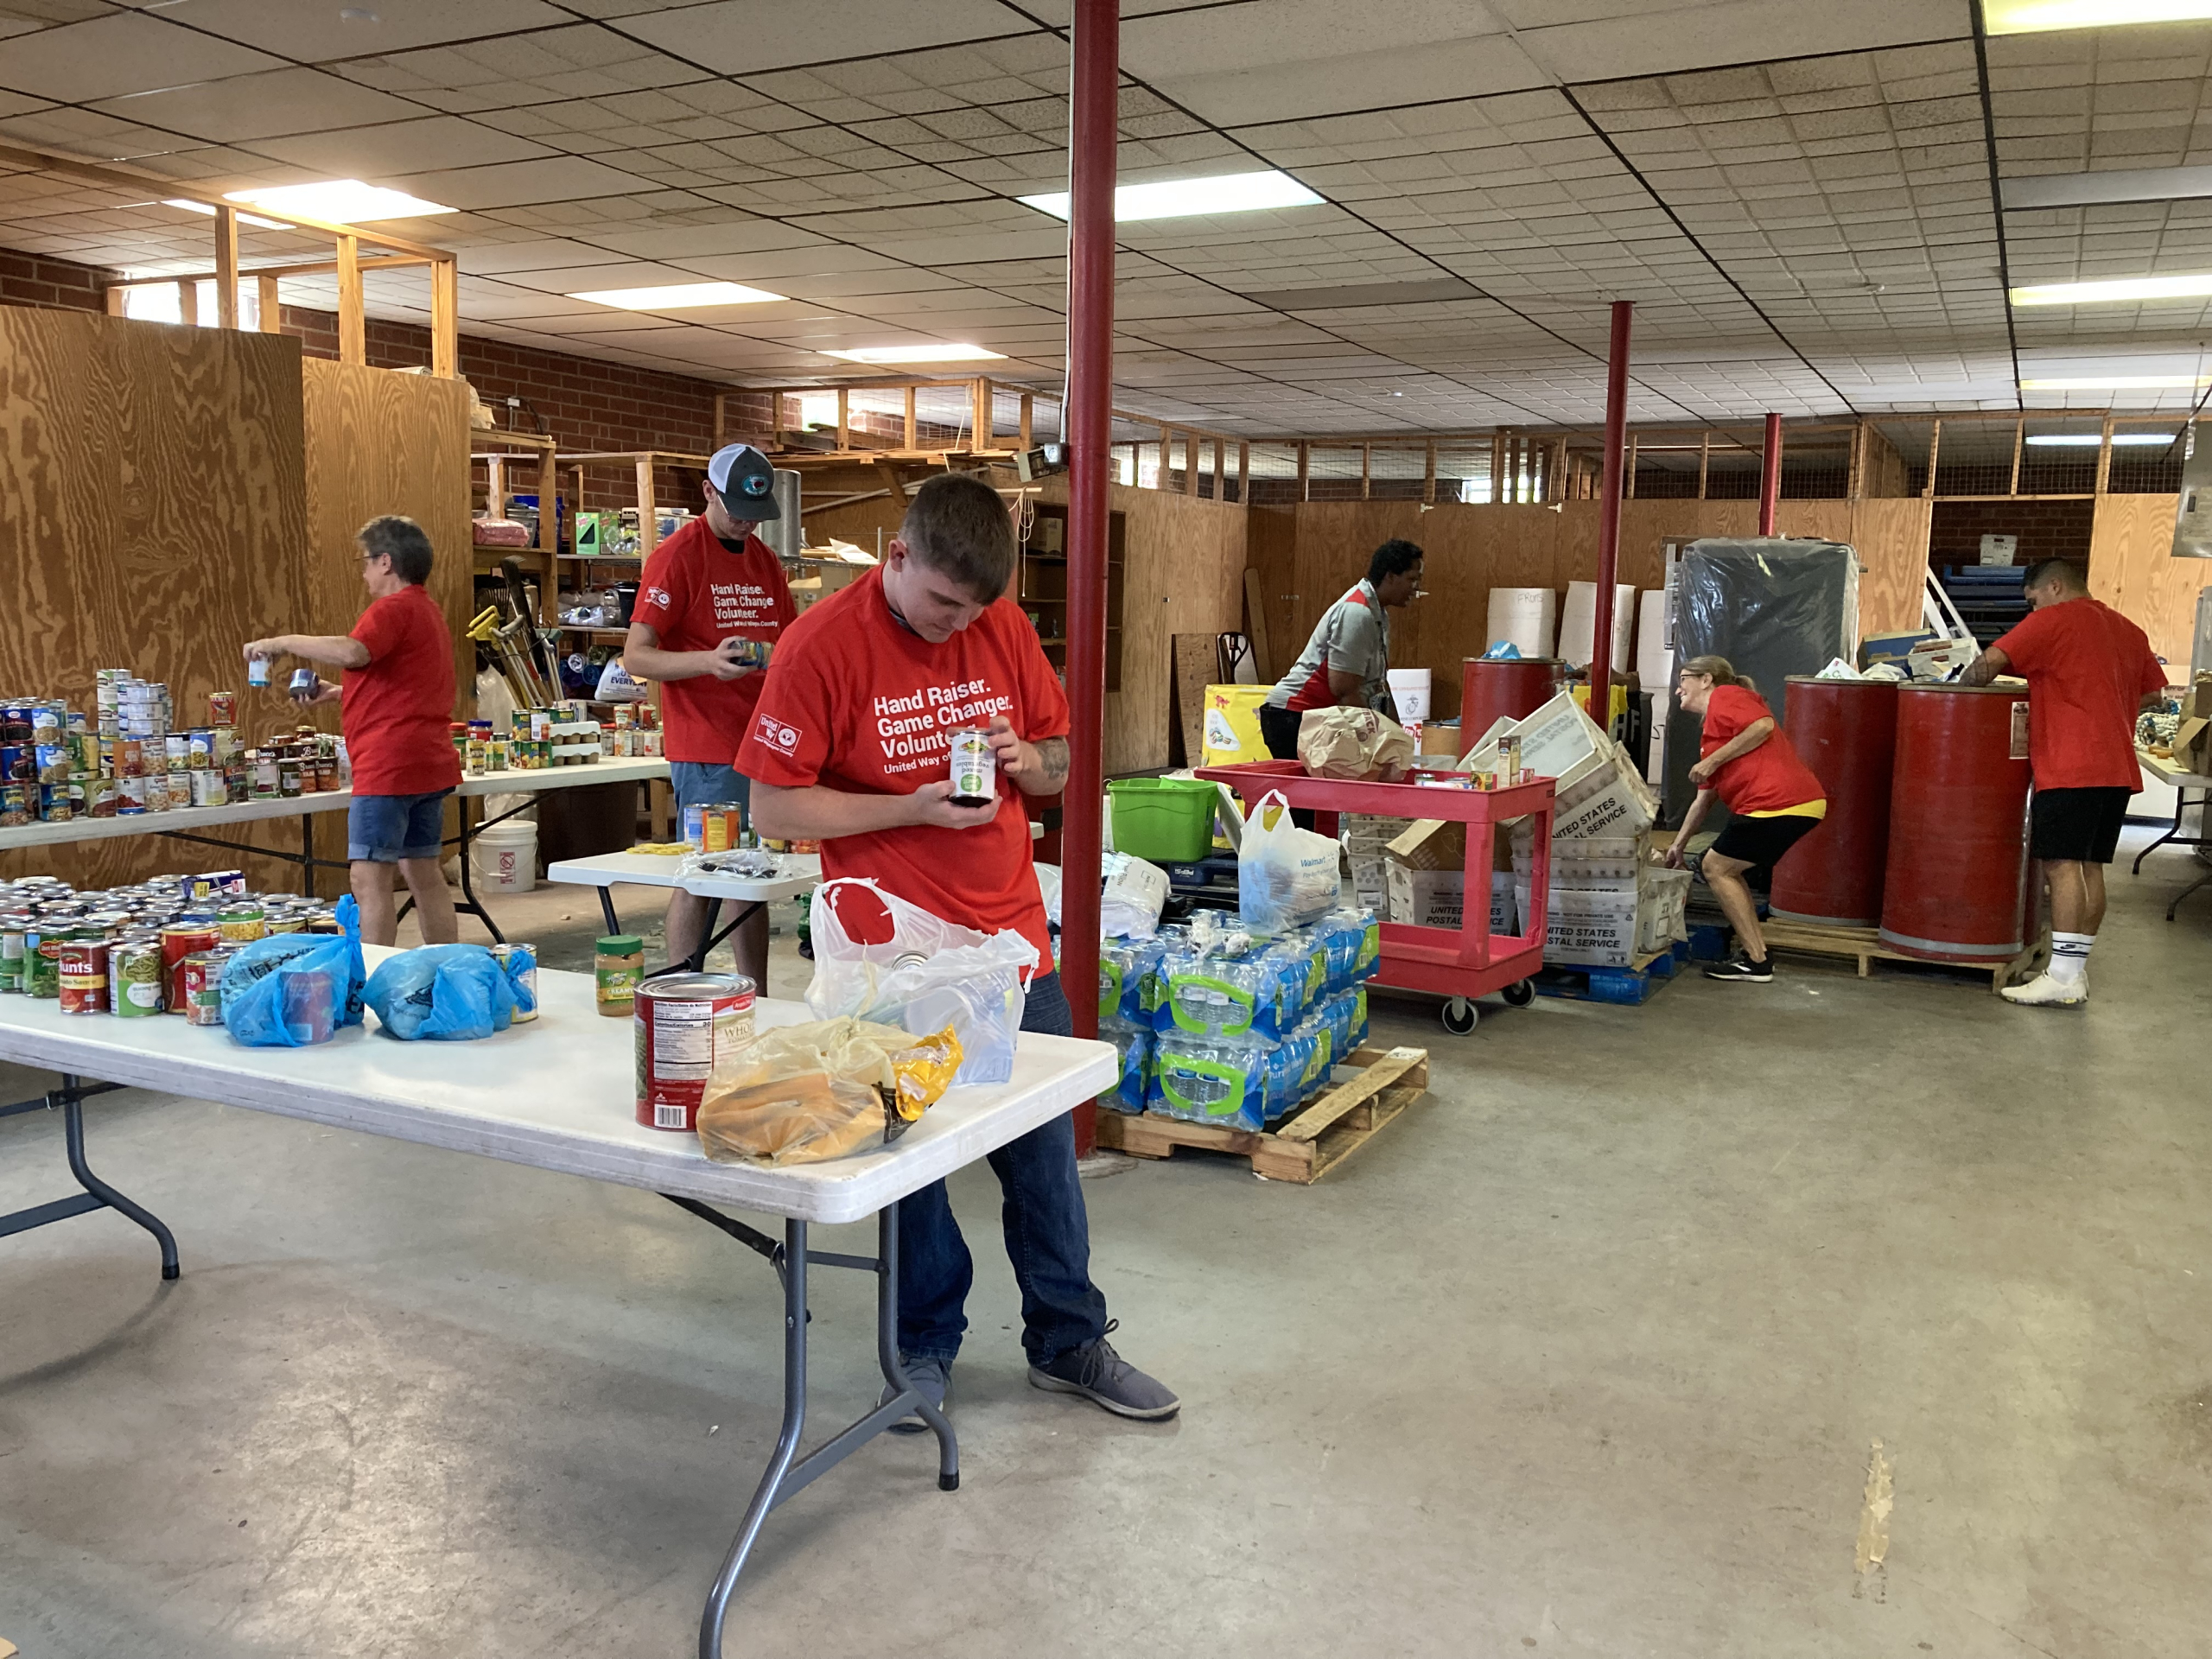 United Way’s Day of Action Was A Successful Volunteer Collaboration With Local Nonprofits